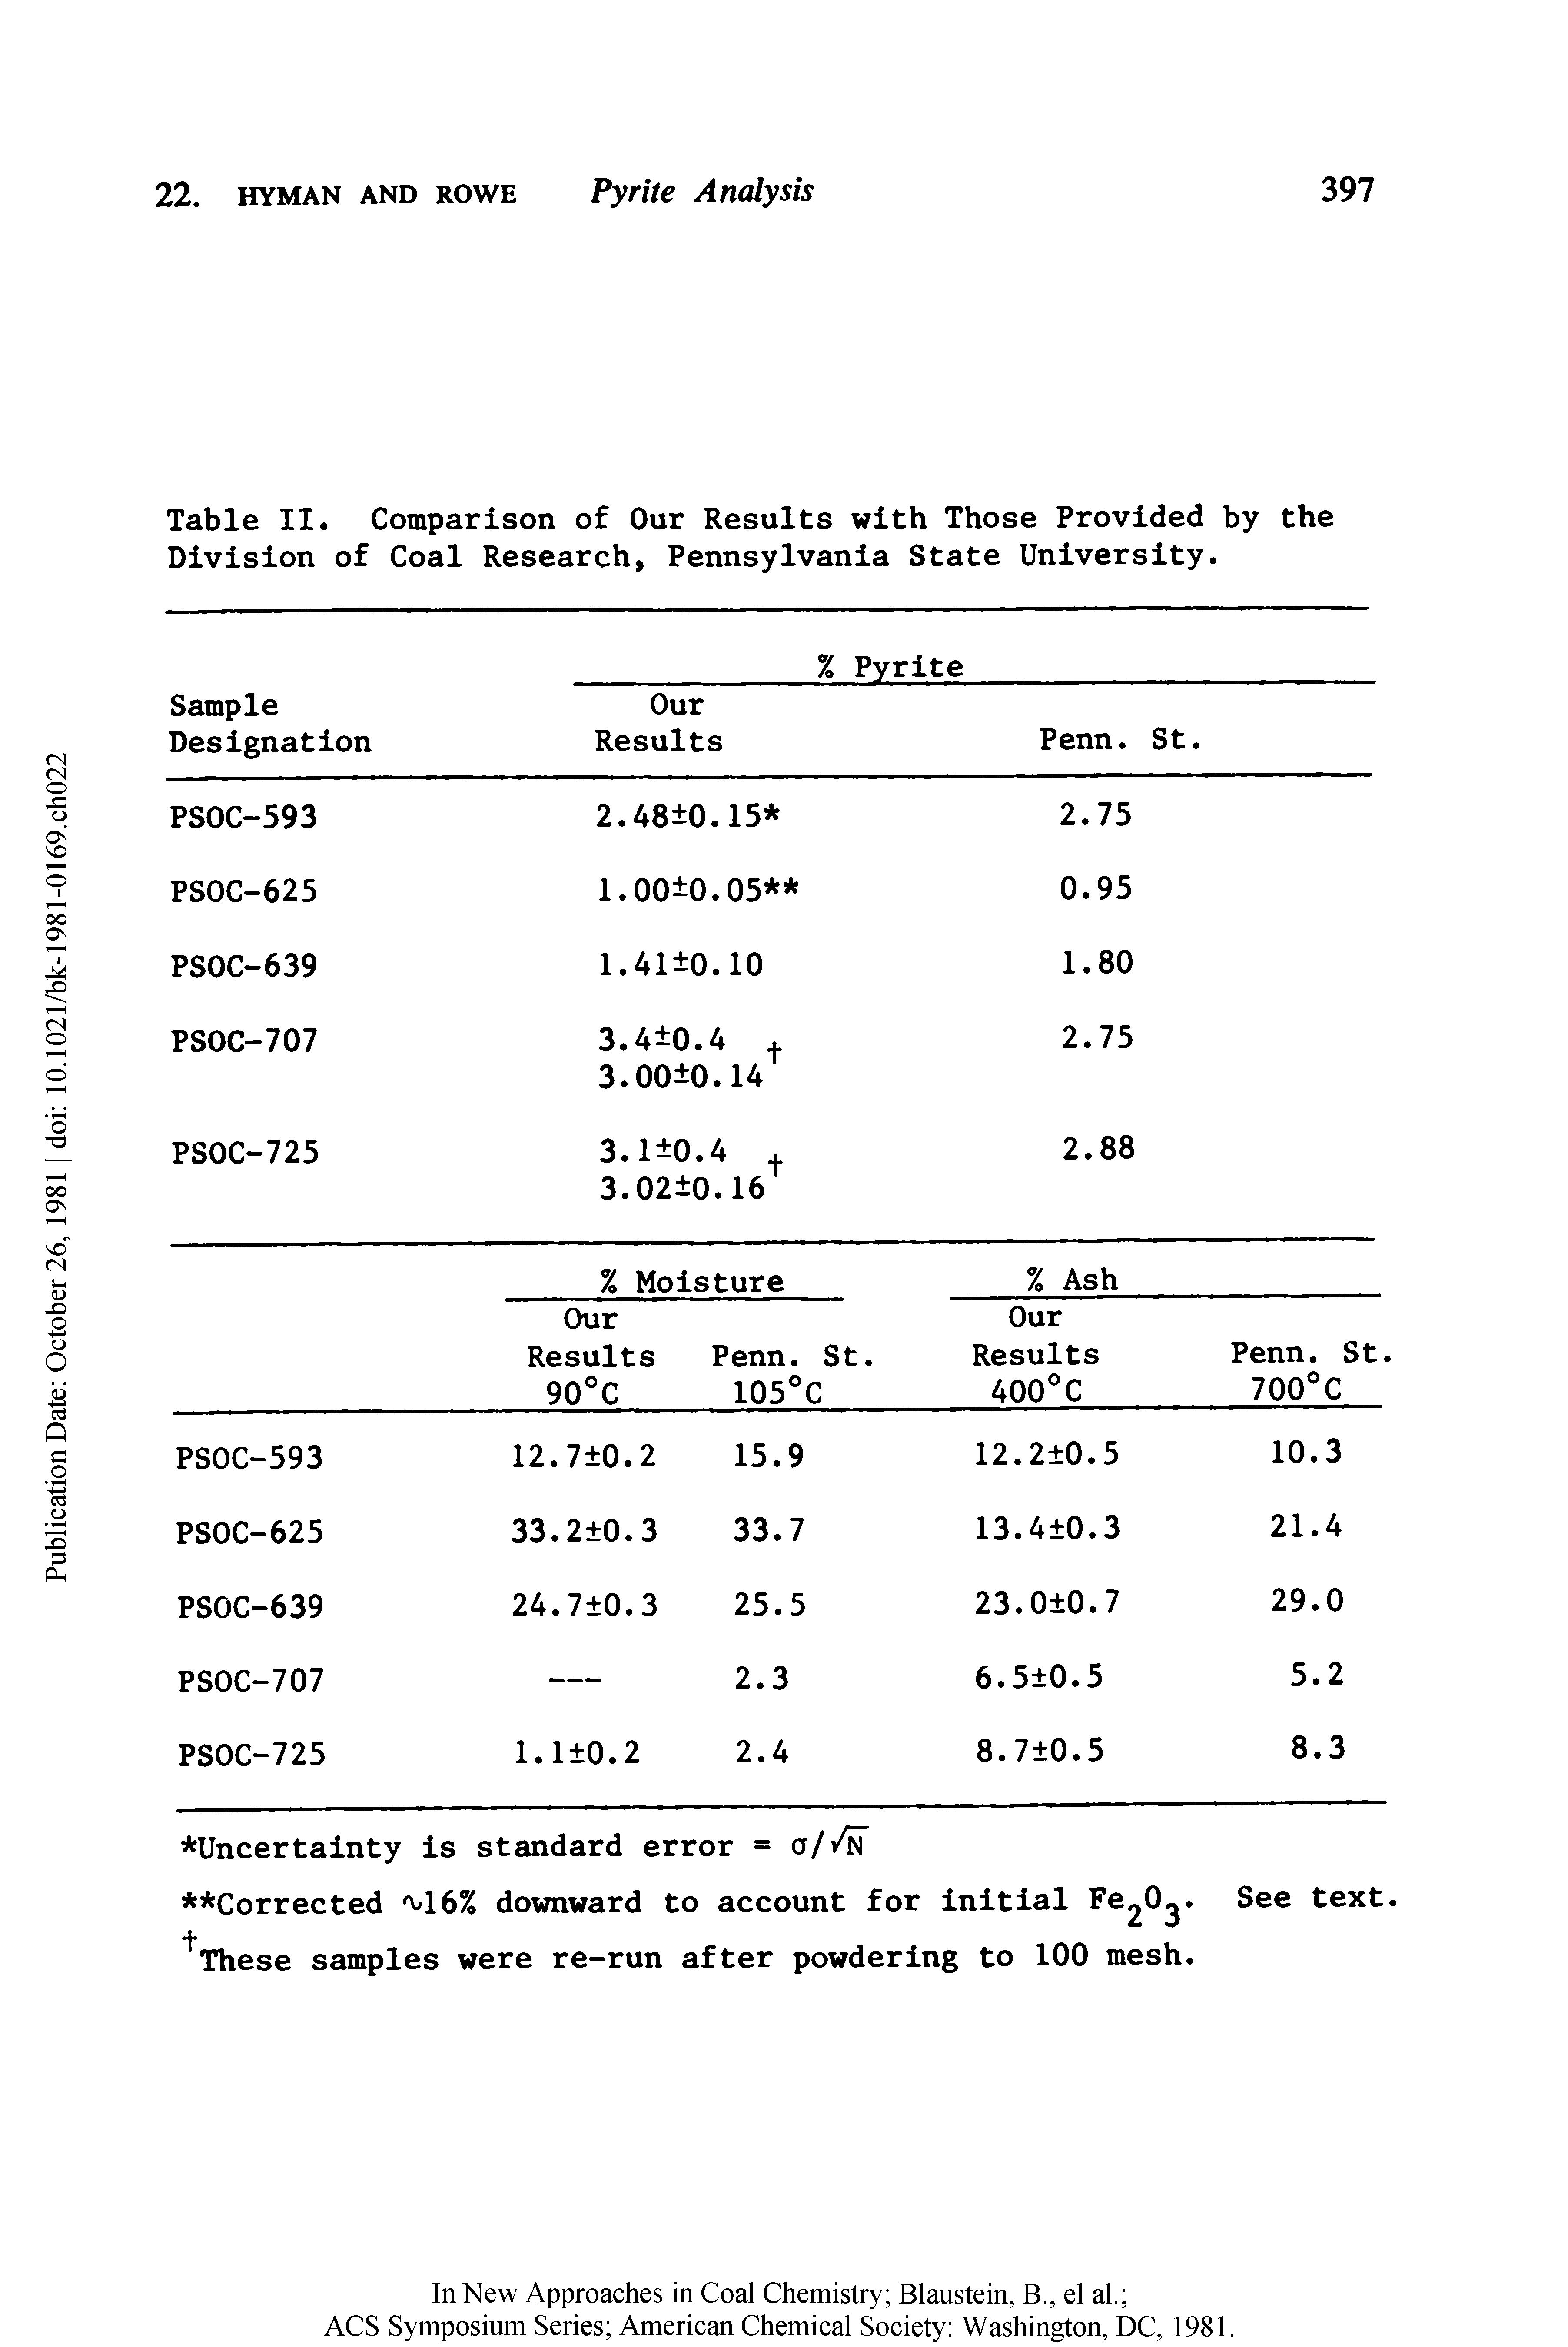 Table II, Comparison of Our Results with Those Provided by the Division of Coal Research, Pennsylvania State University.